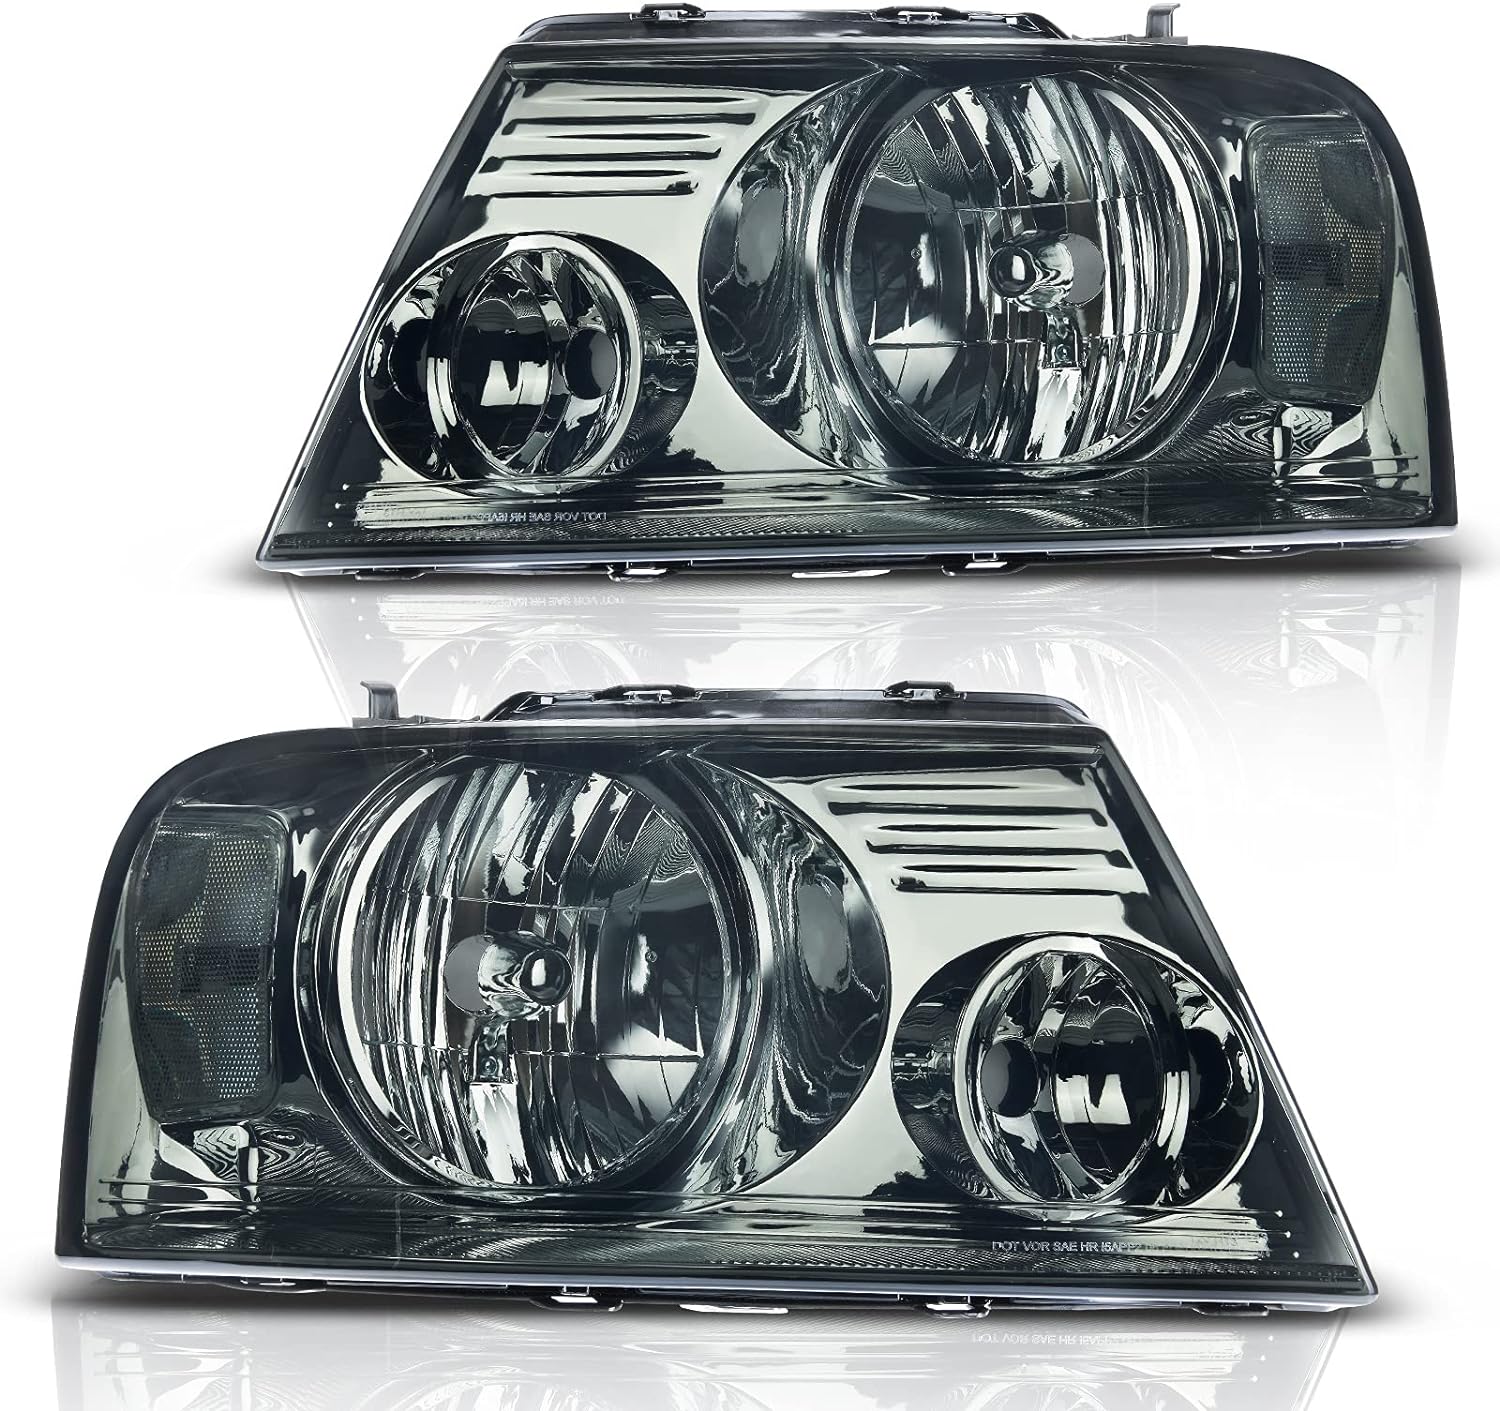 DWVO Headlights Assembly Compatible with 2004 2005 2006 2007 2008 Ford F-150/06 07 08 Lincoln Mark LT OE Headlamp Chrome Housing Smoke Lens Clear Reflector